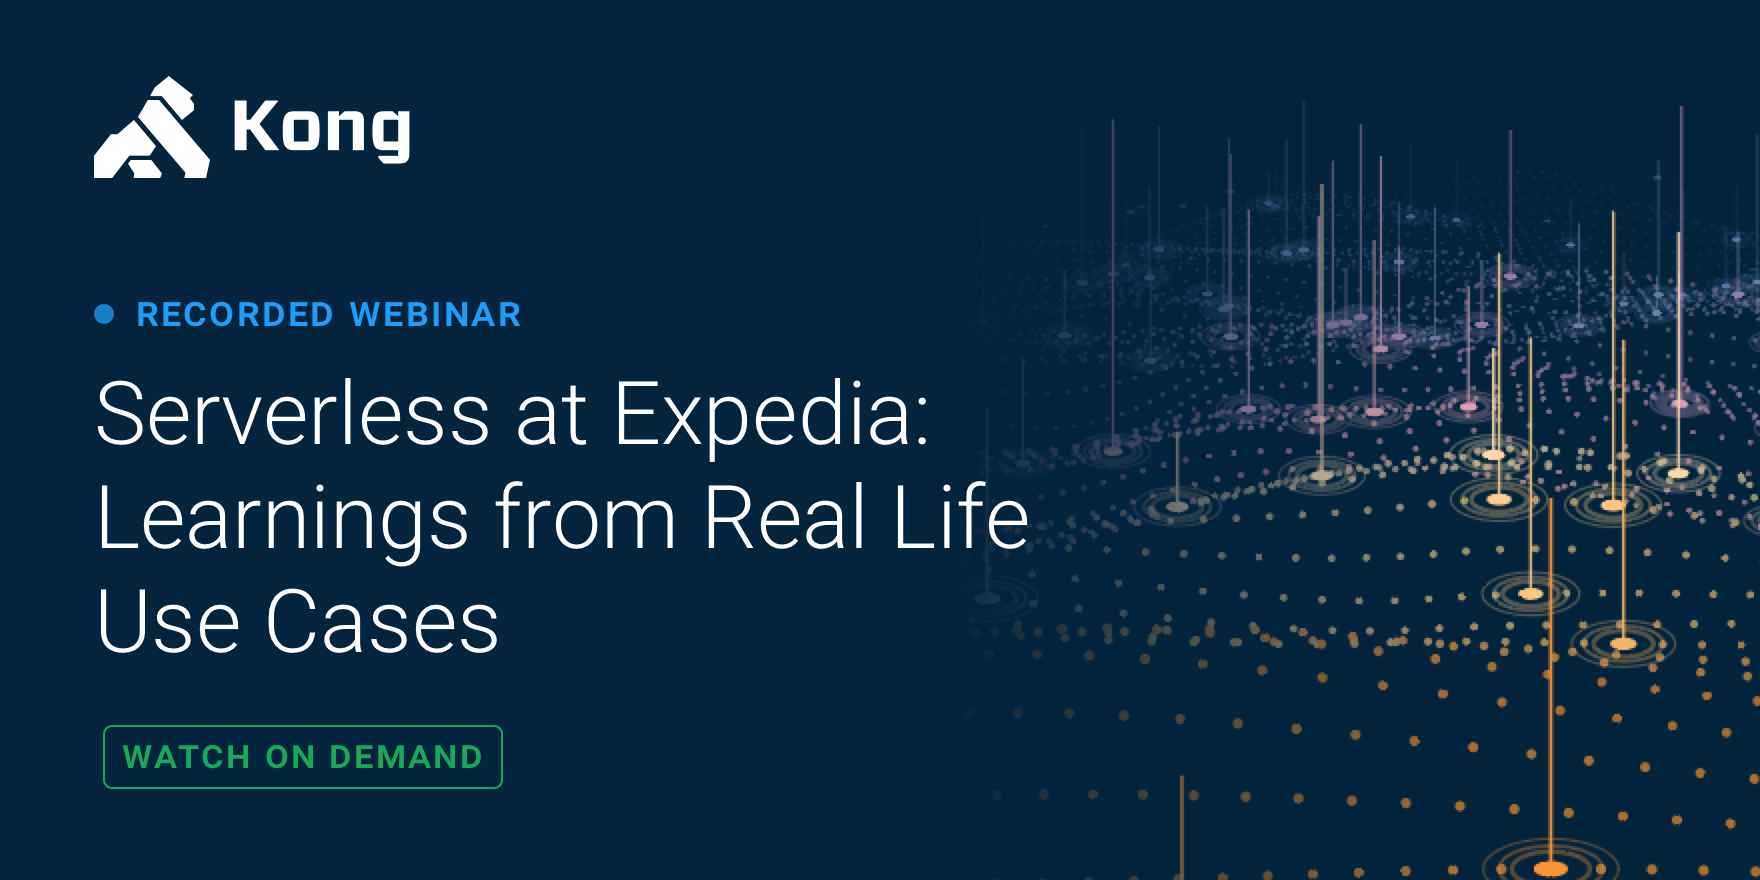 Serverless at Expedia: Learnings from Real Life Use Cases